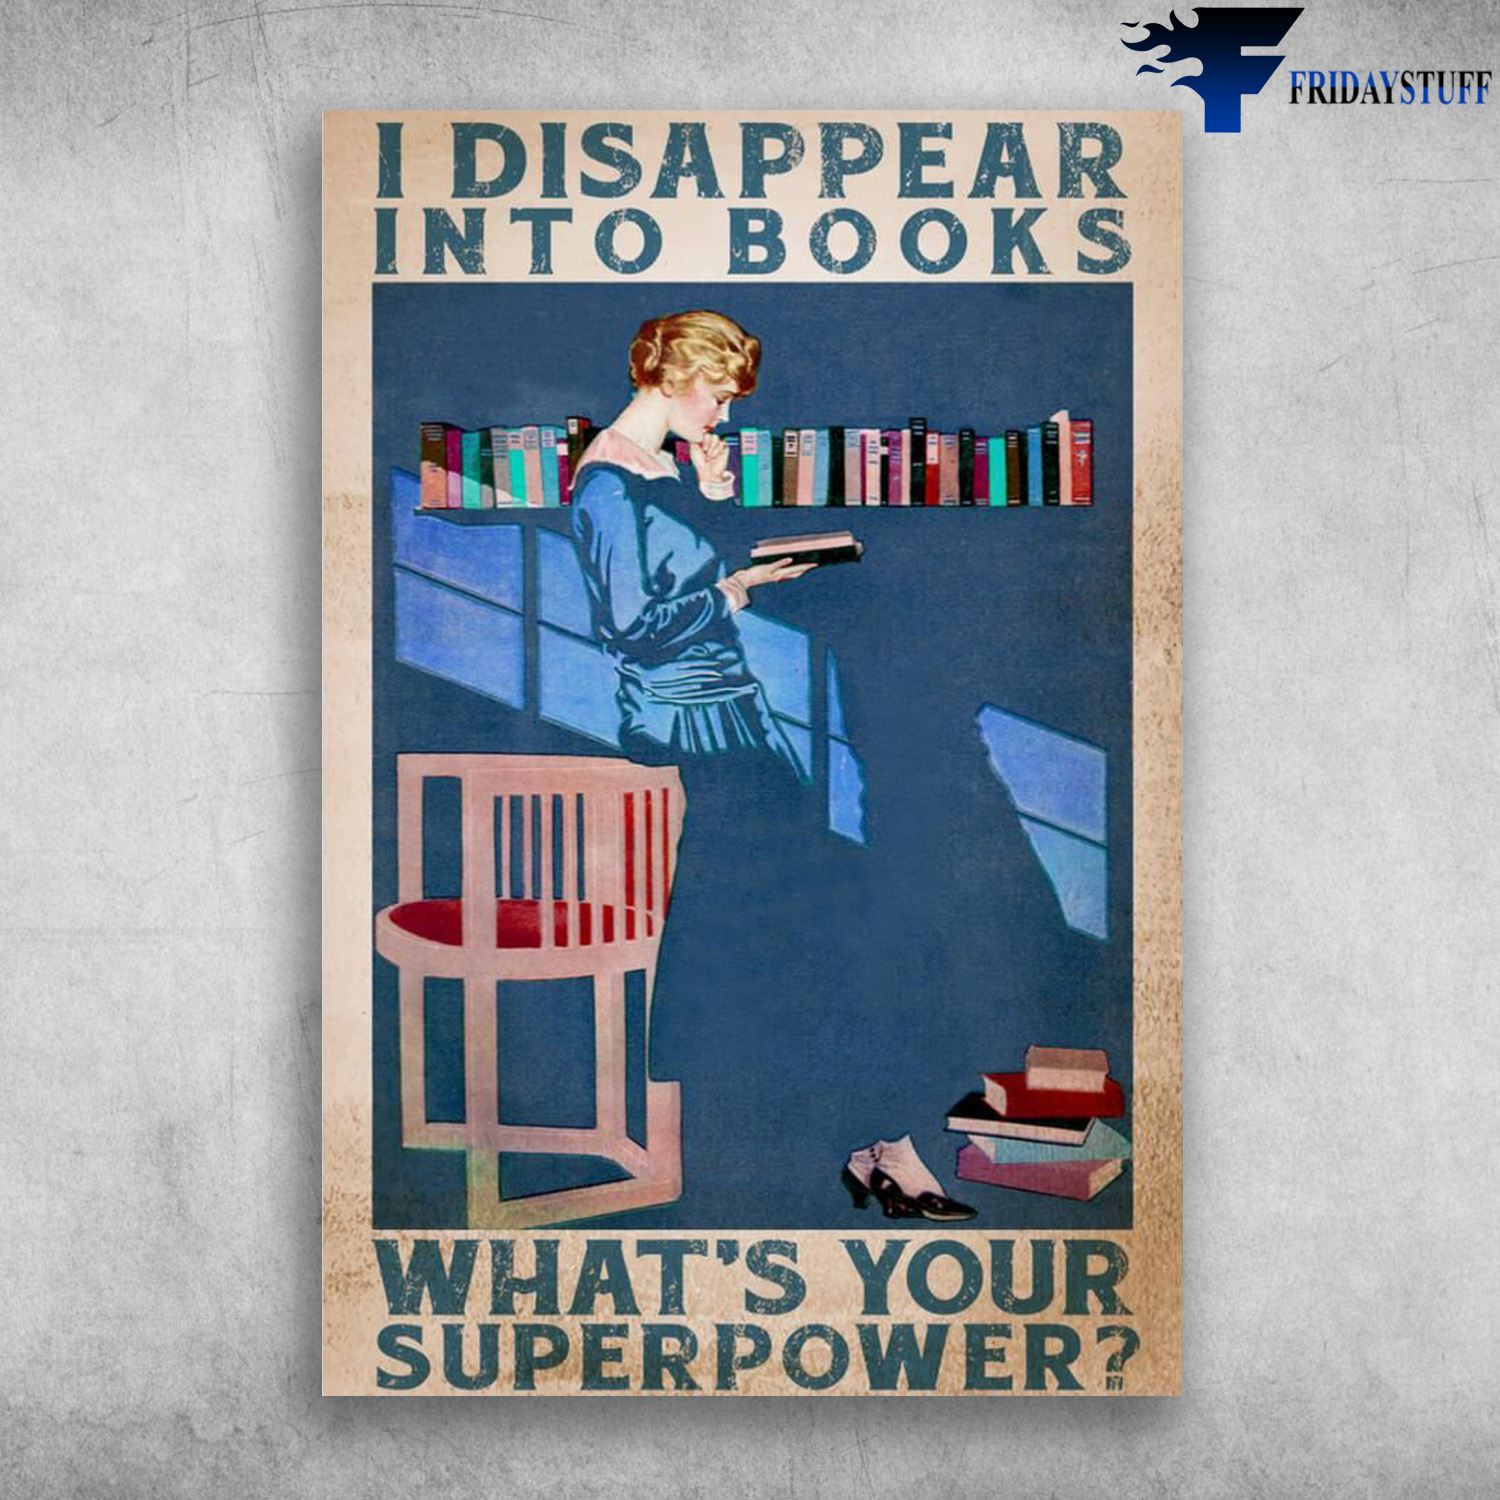 Girl Reading Book - I Disappear Into Books, What's Your Superpower